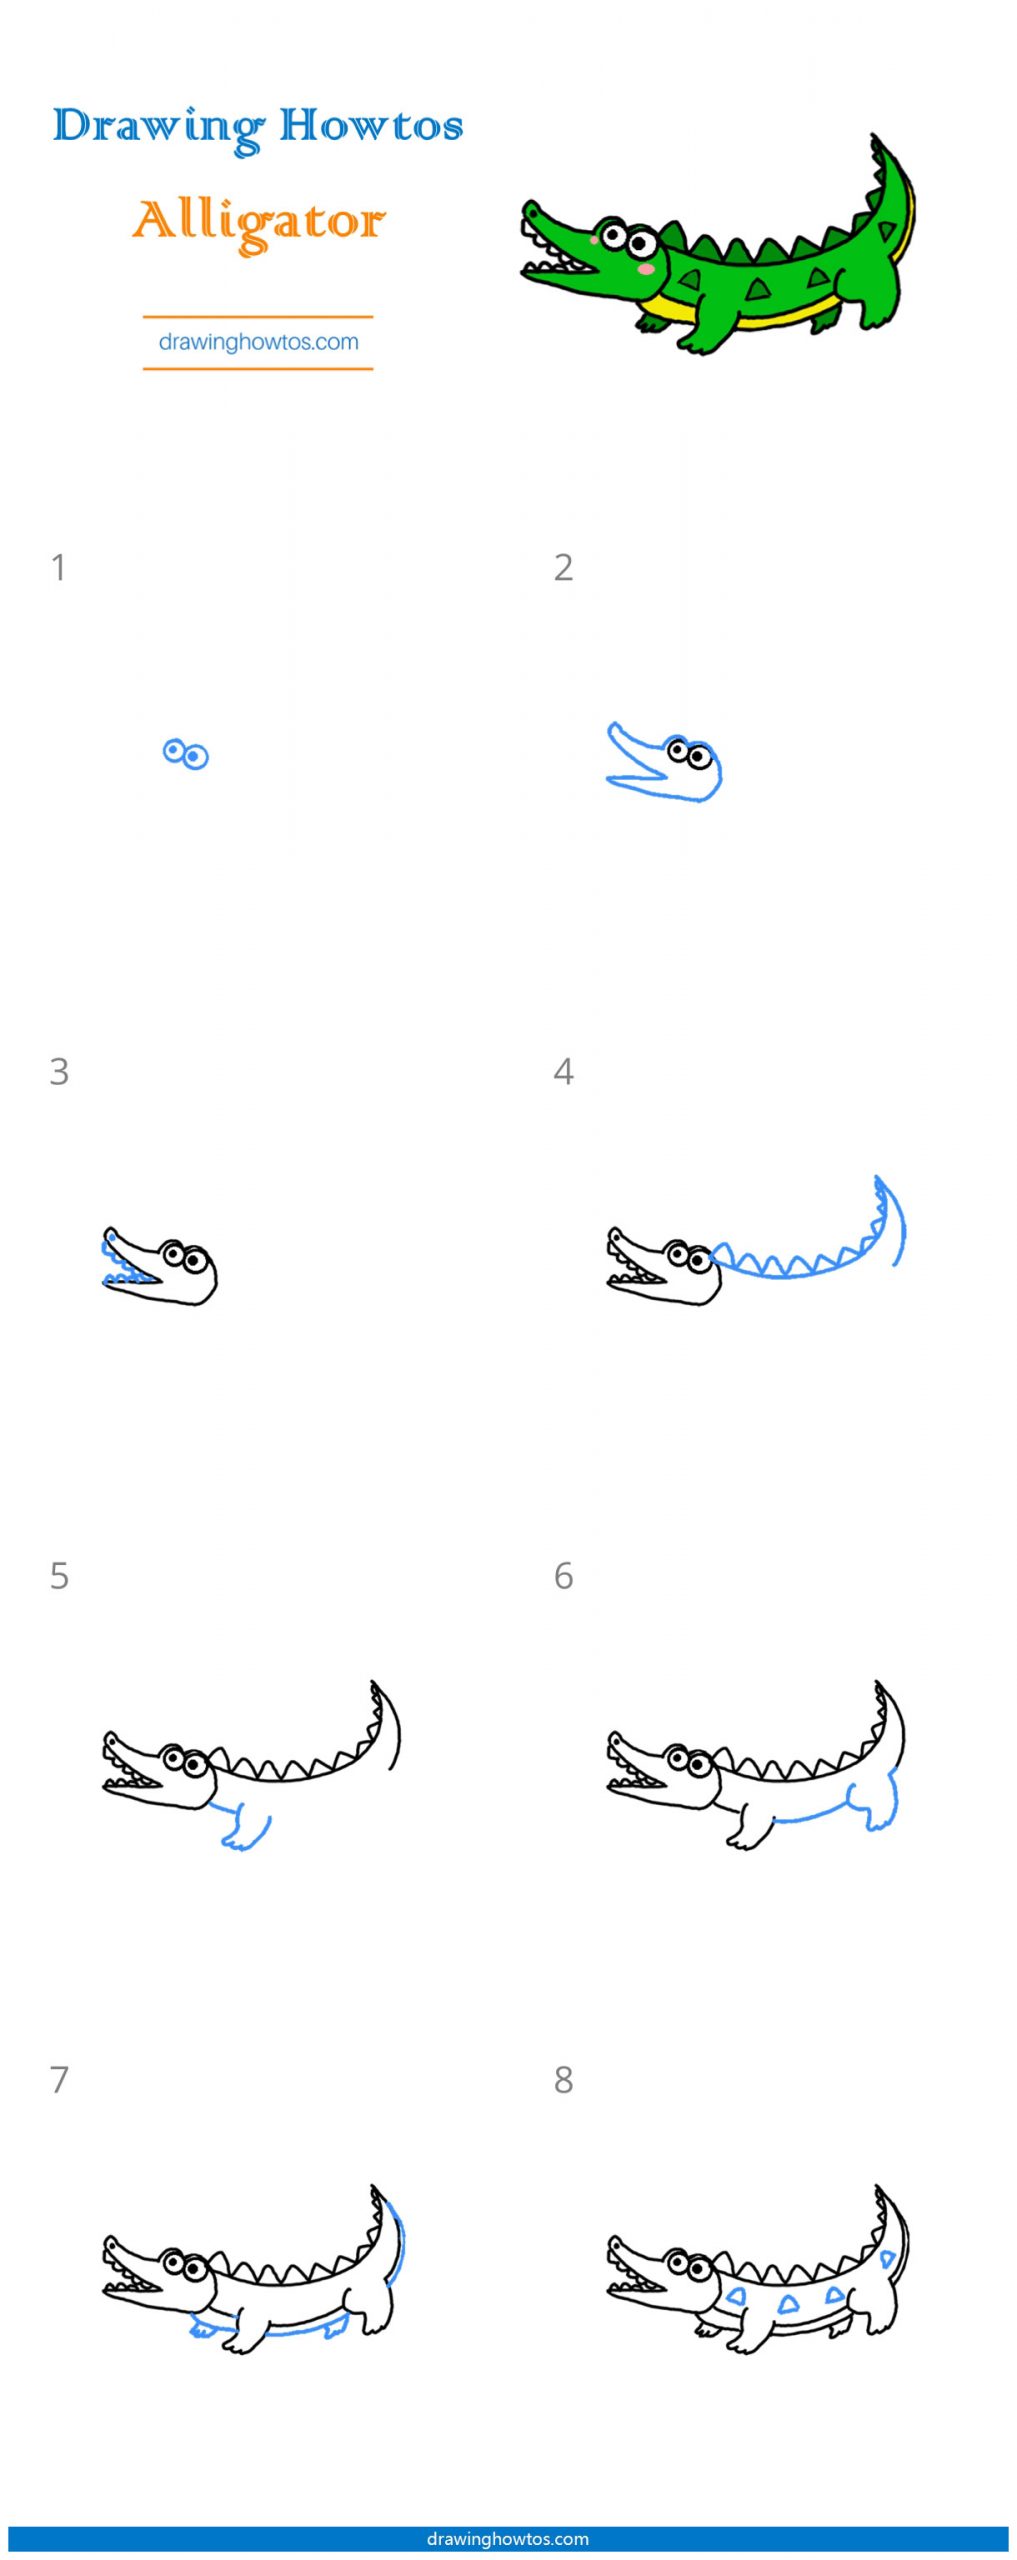 How to Draw an Alligator - Step by Step Easy Drawing Guides - Drawing